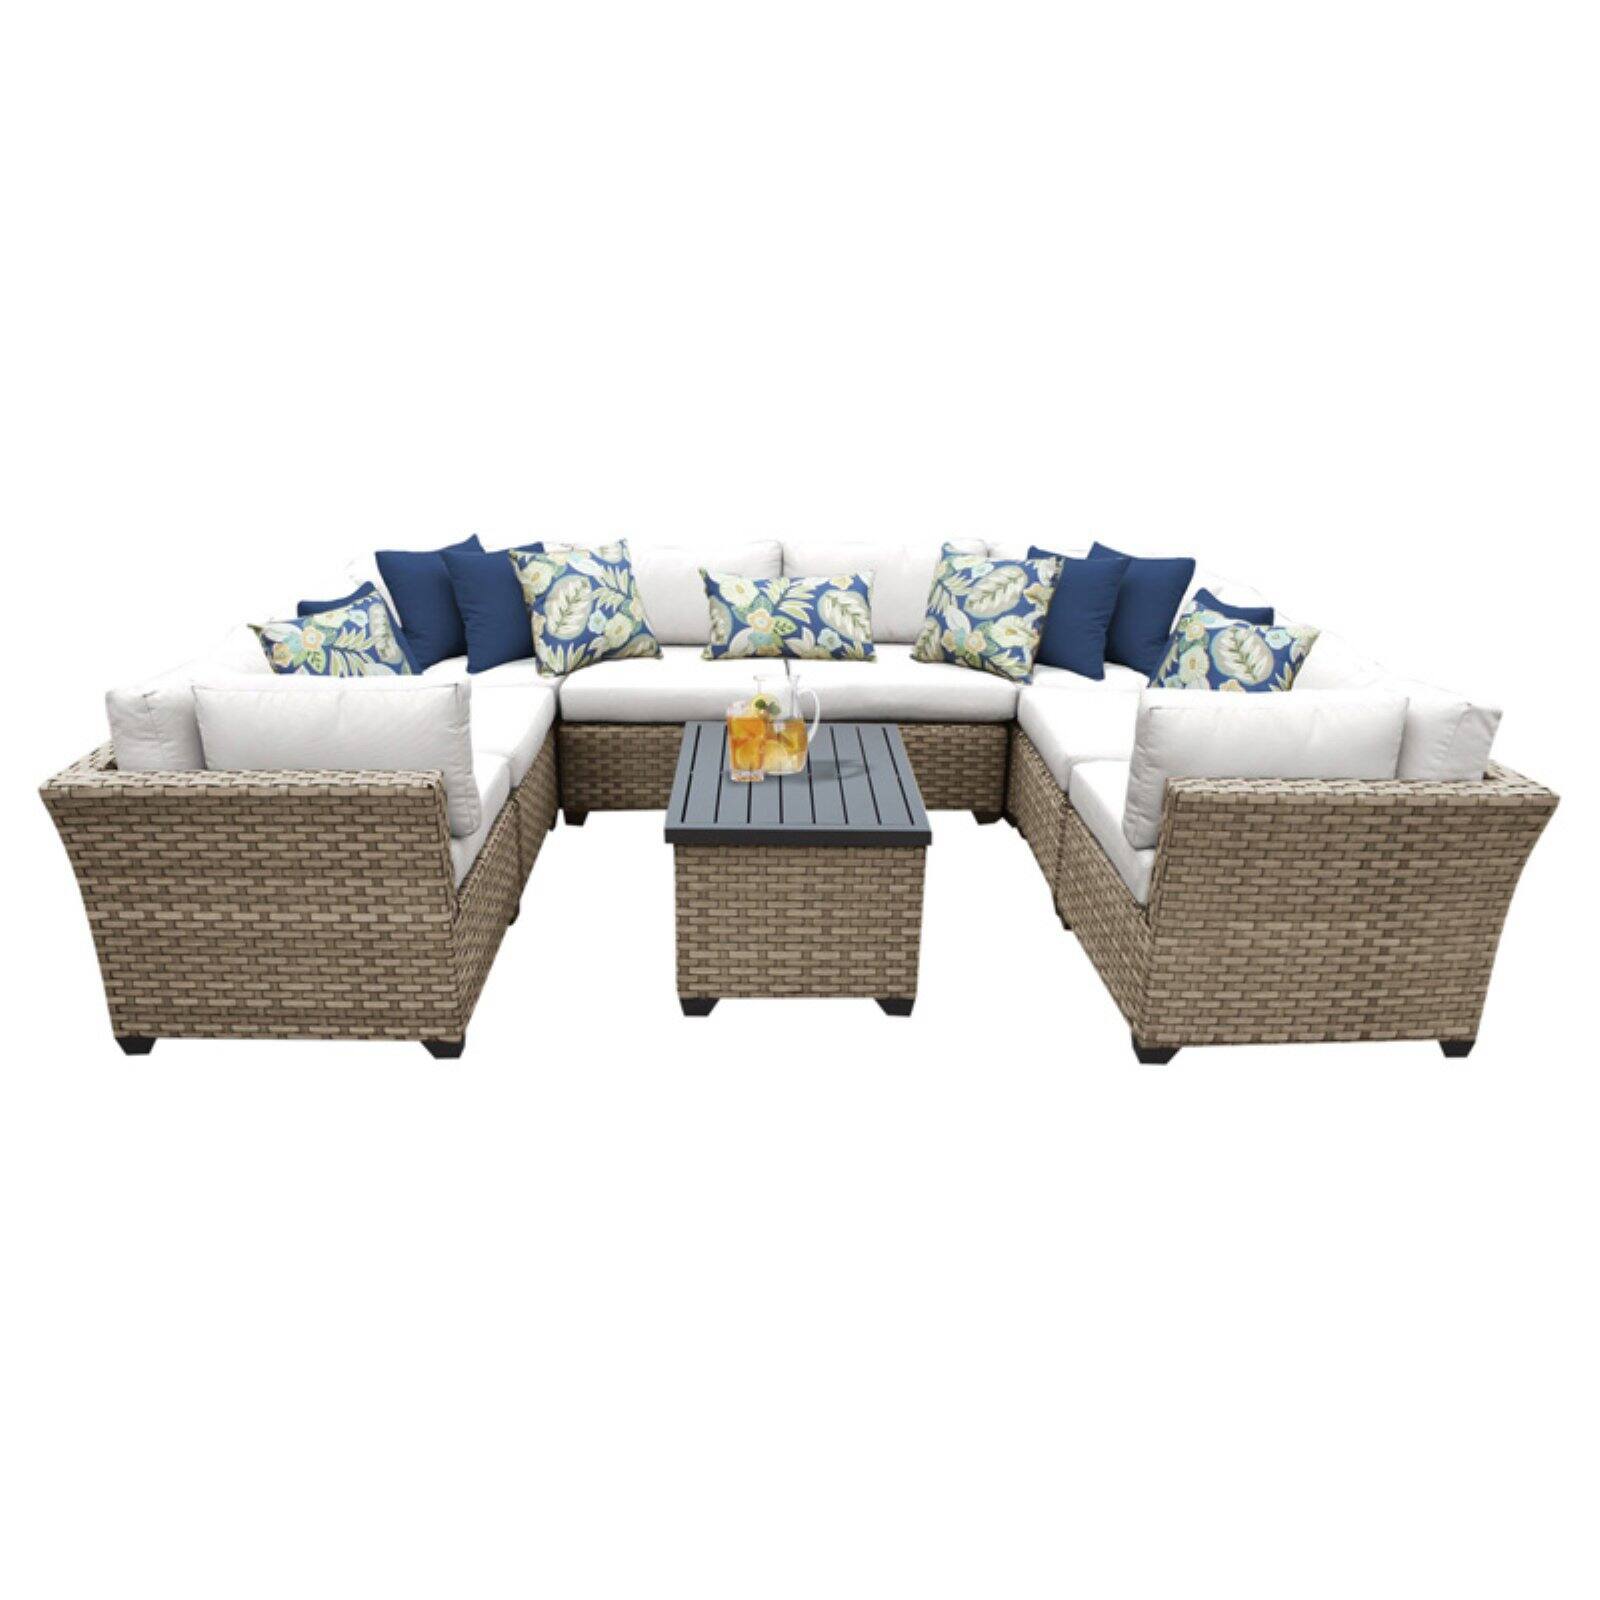 TK Classics Monterey Wicker 9 Piece Patio Conversation Set with Coffee Table and 2 Sets of Cushion Covers - image 1 of 5